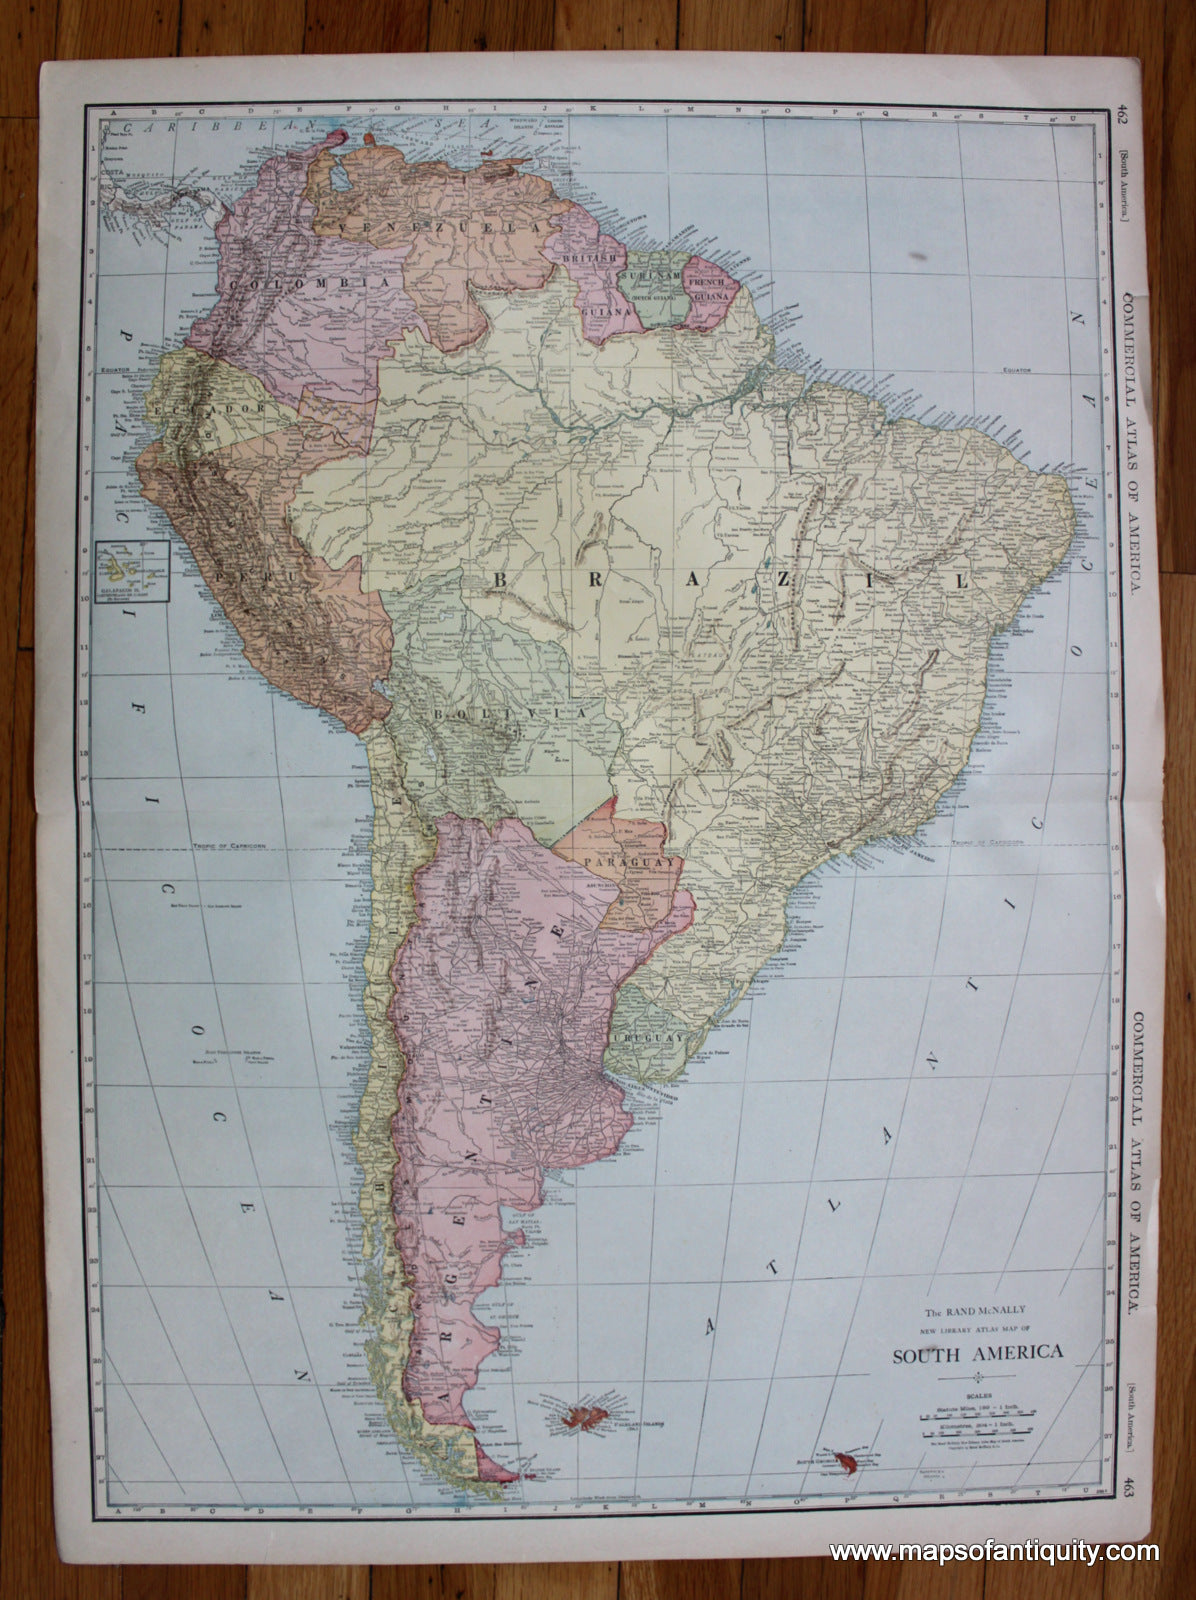 Antique-Printed-Color-Map-The-Rand-McNally-New-Library-Atlas-Map-of-South-America-Caribbean-&-Latin-America-South-America-1916-Rand-McNally-Maps-Of-Antiquity